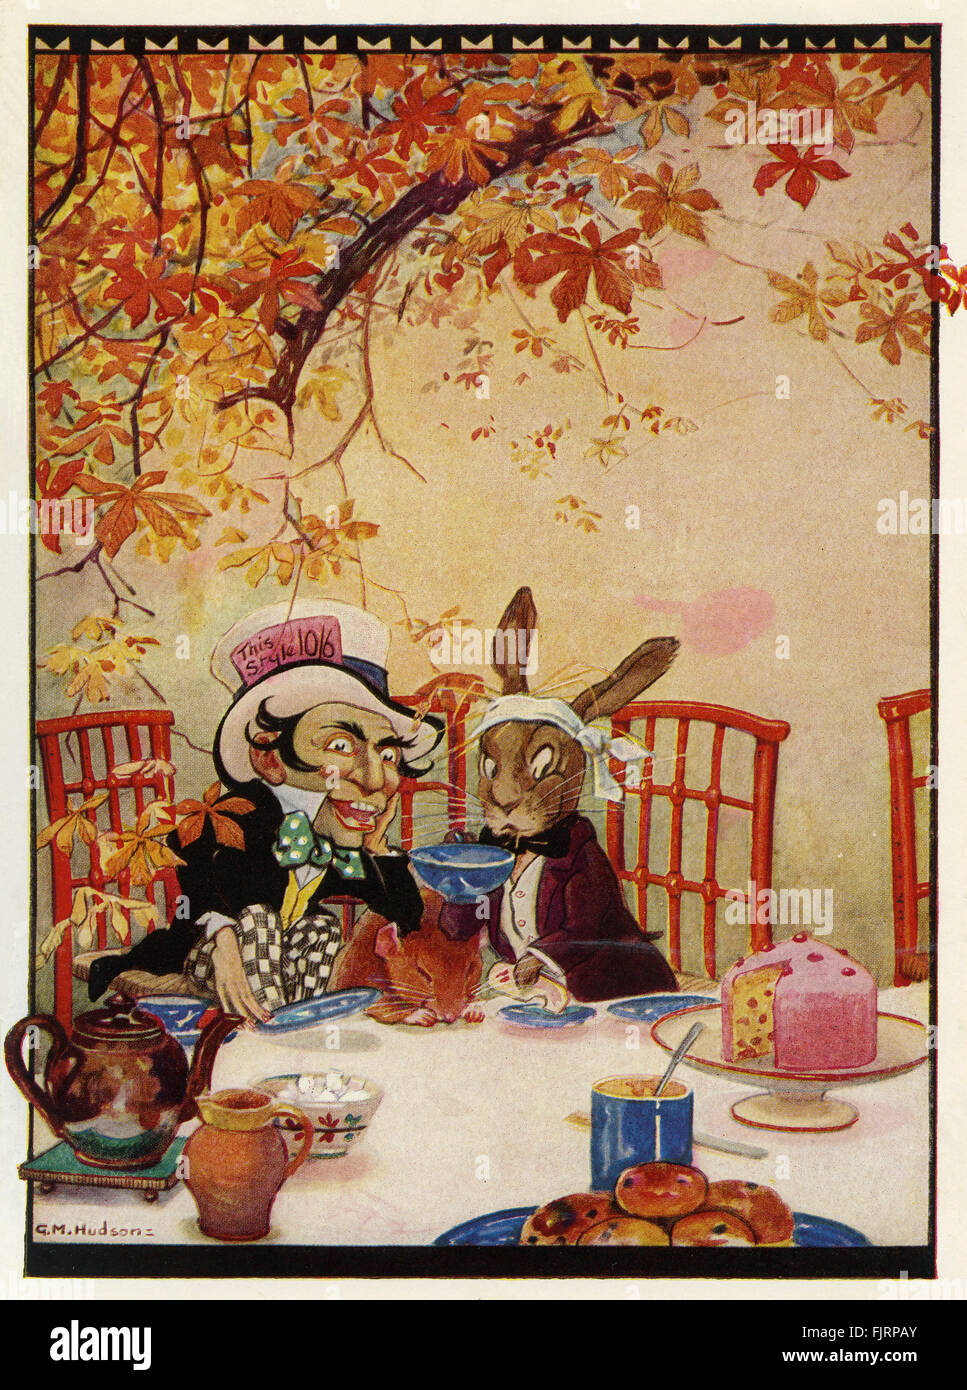 Alice's Adventures in Wonderland by Lewis Carroll. Illustrated by Gwynedd M Huson (dates not known).  Capion reads:The March Hare and the Hatter were having tea (Chapter 7). LC - British mathematician and author - real name Charles Lutwidge Dodgson: 27 January 1832 – 14 January 1898 Stock Photo